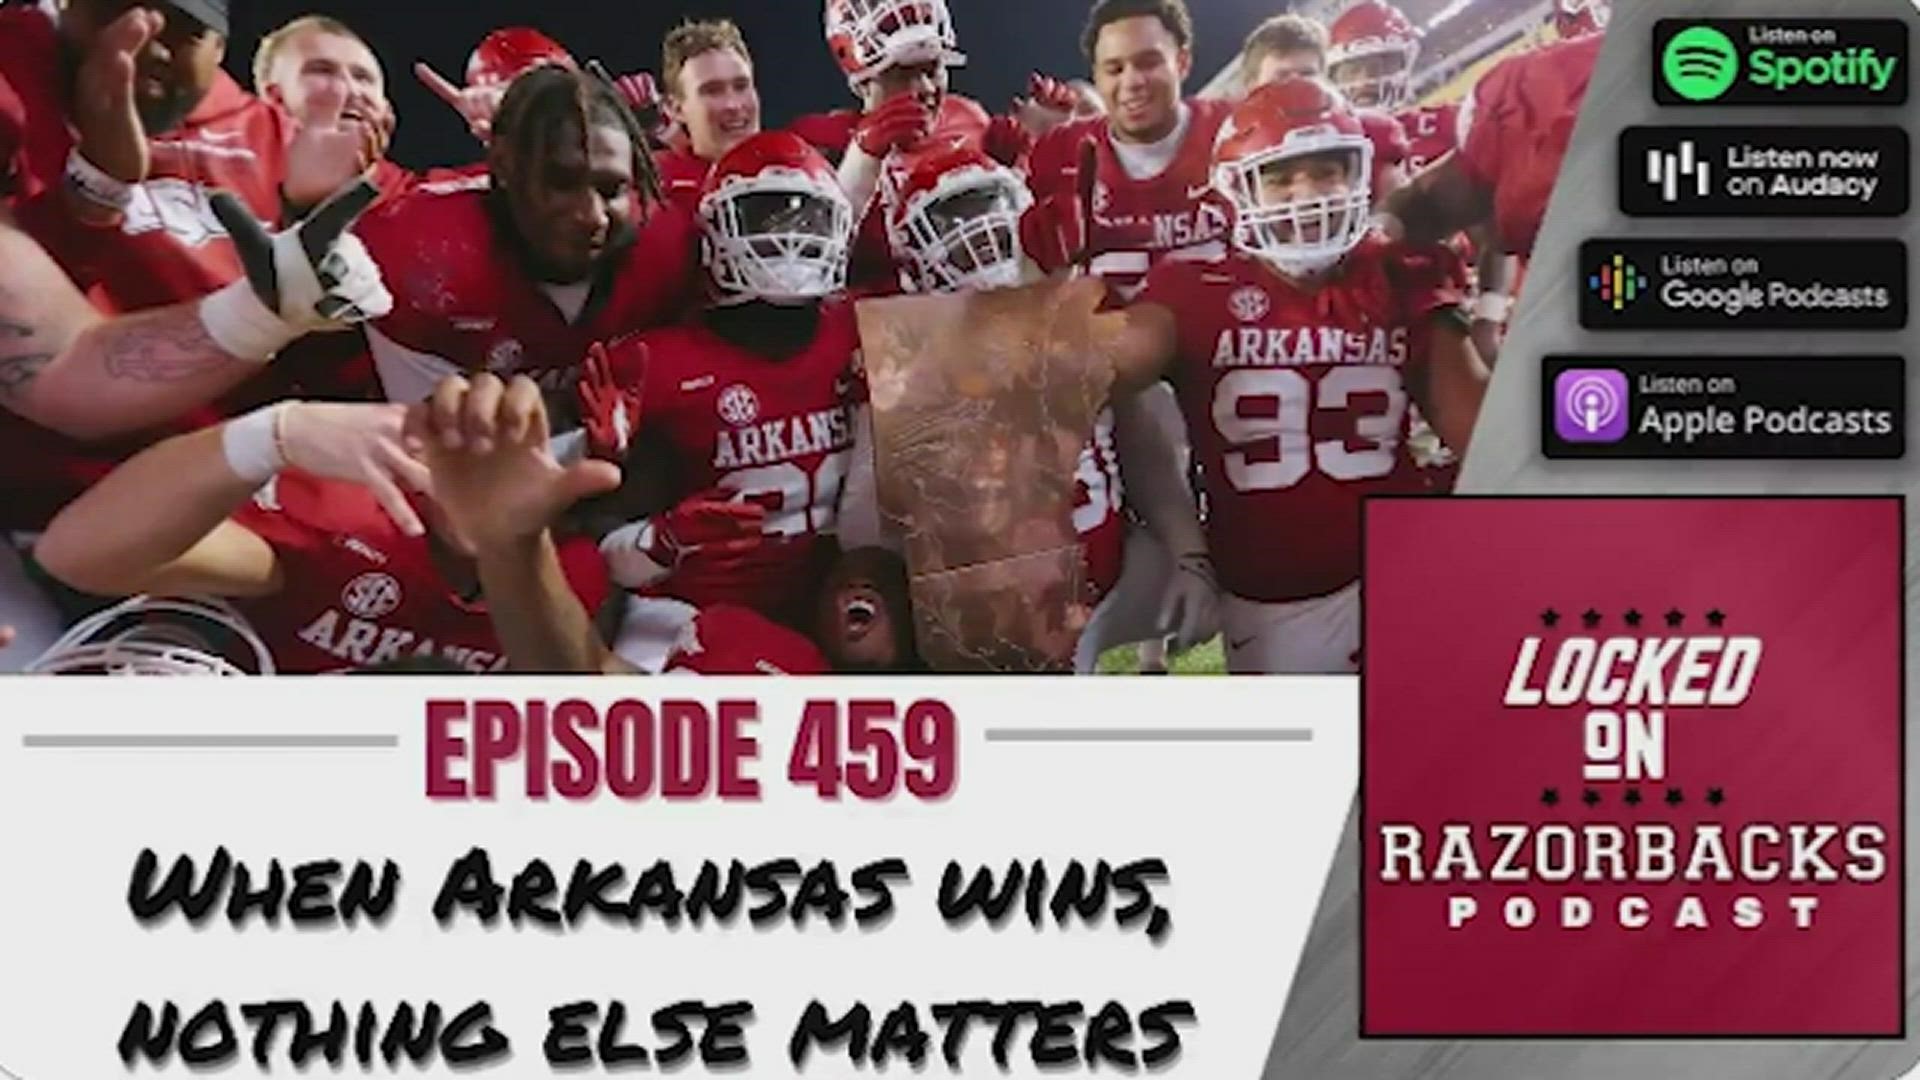 When Arkansas wins, nothing else matters and the Hogs continue to show various forms of success in the SEC West and more on episode 459!